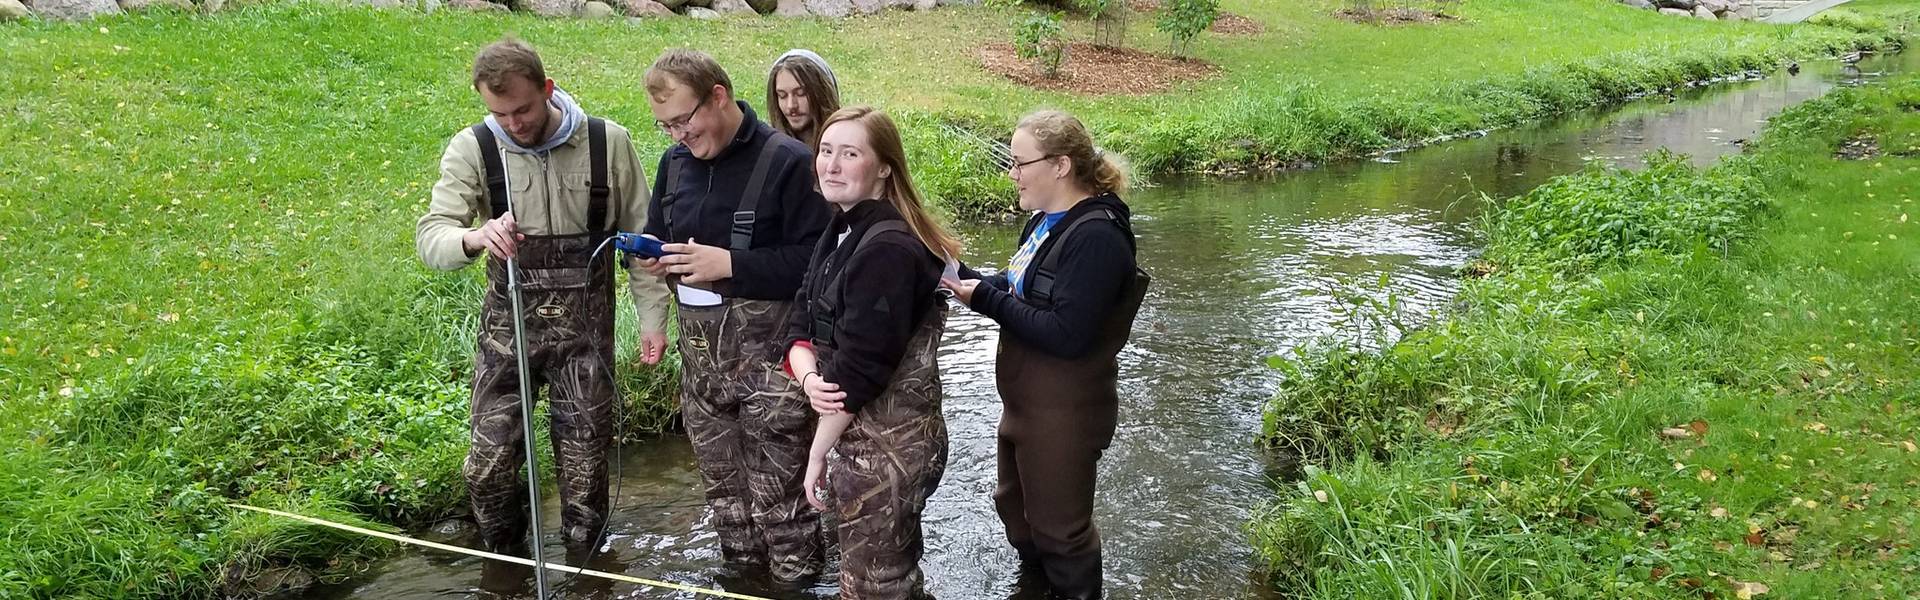 Students collecting water samples in a stream on campus